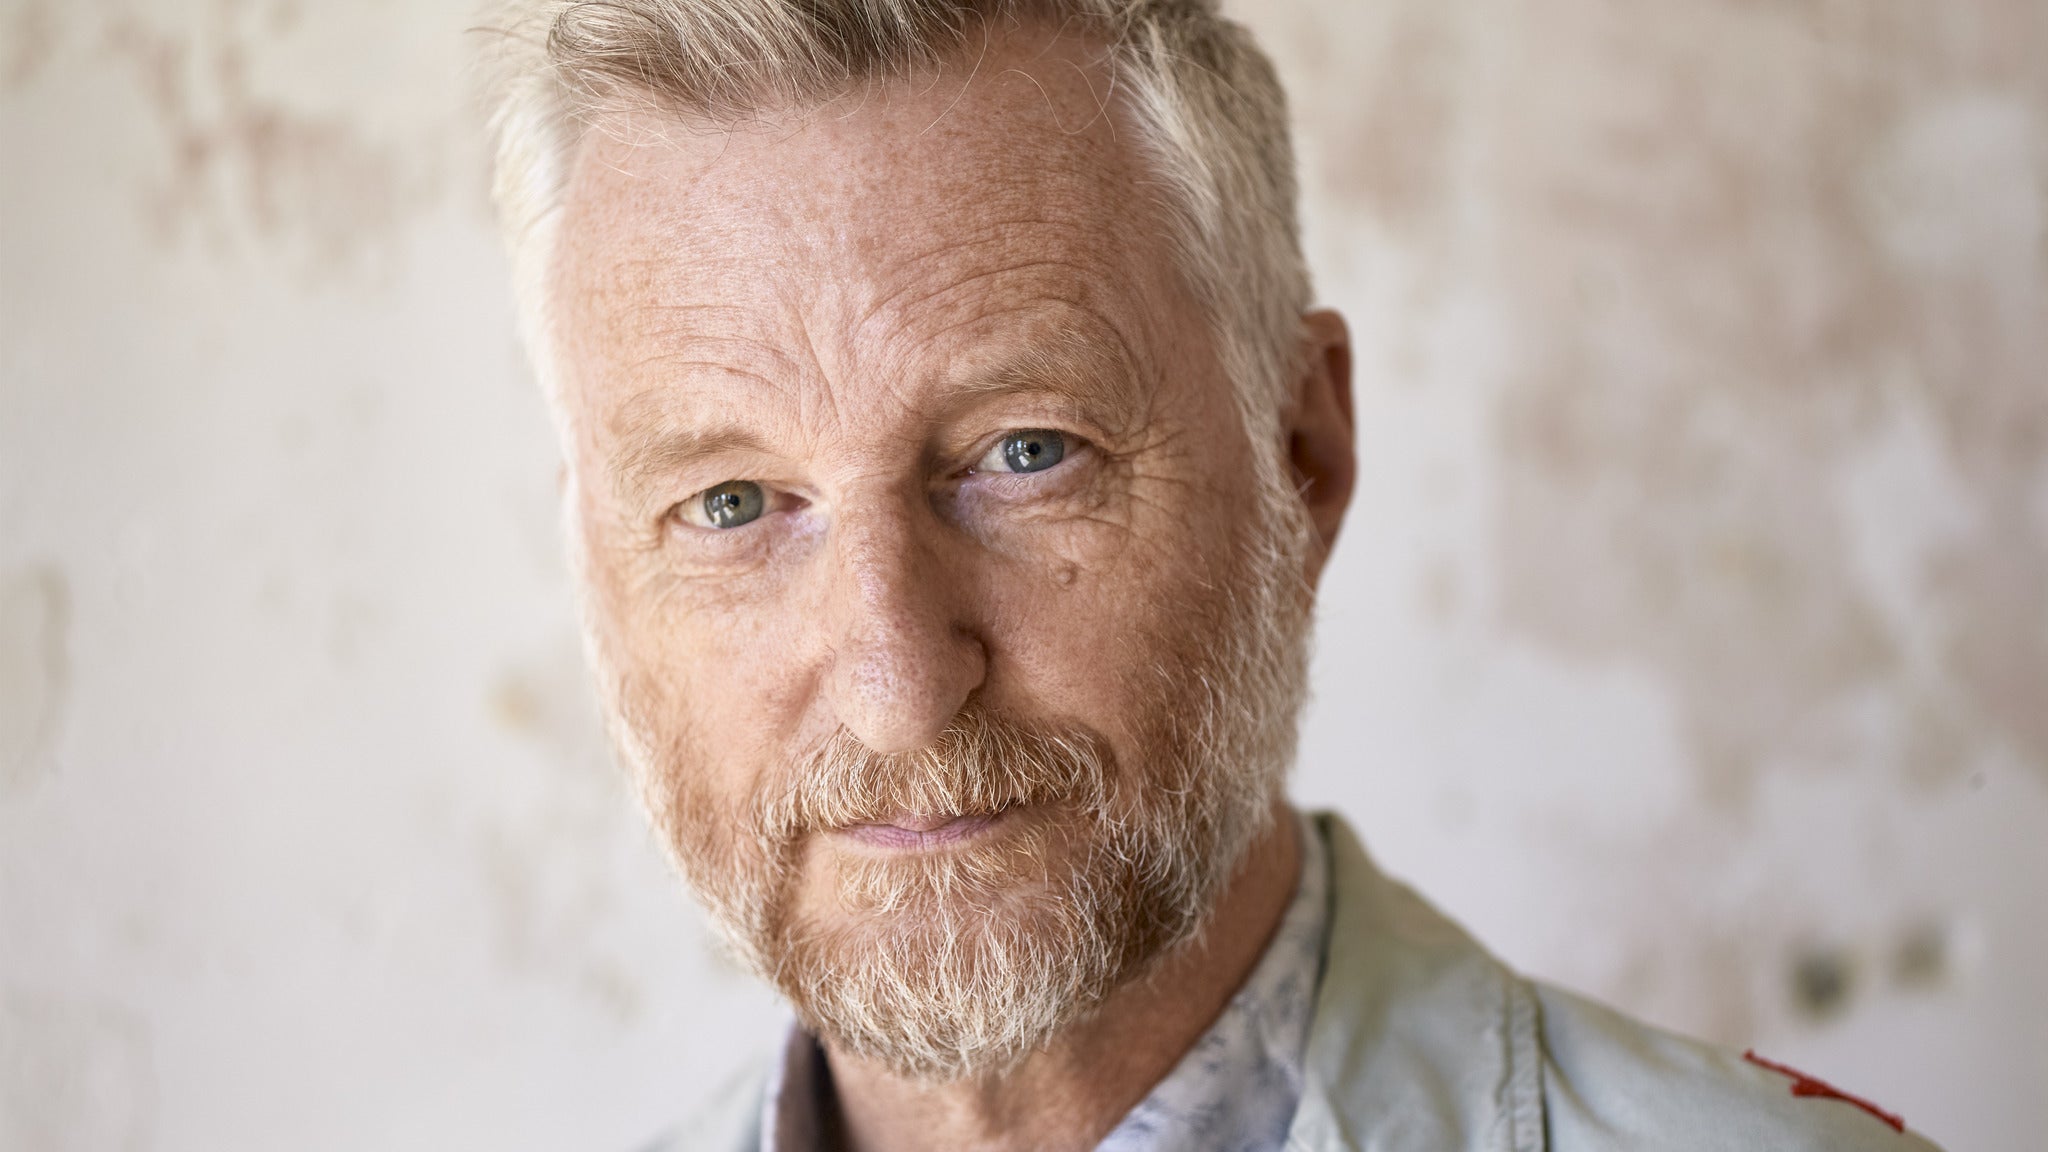 Image used with permission from Ticketmaster | Billy Bragg tickets